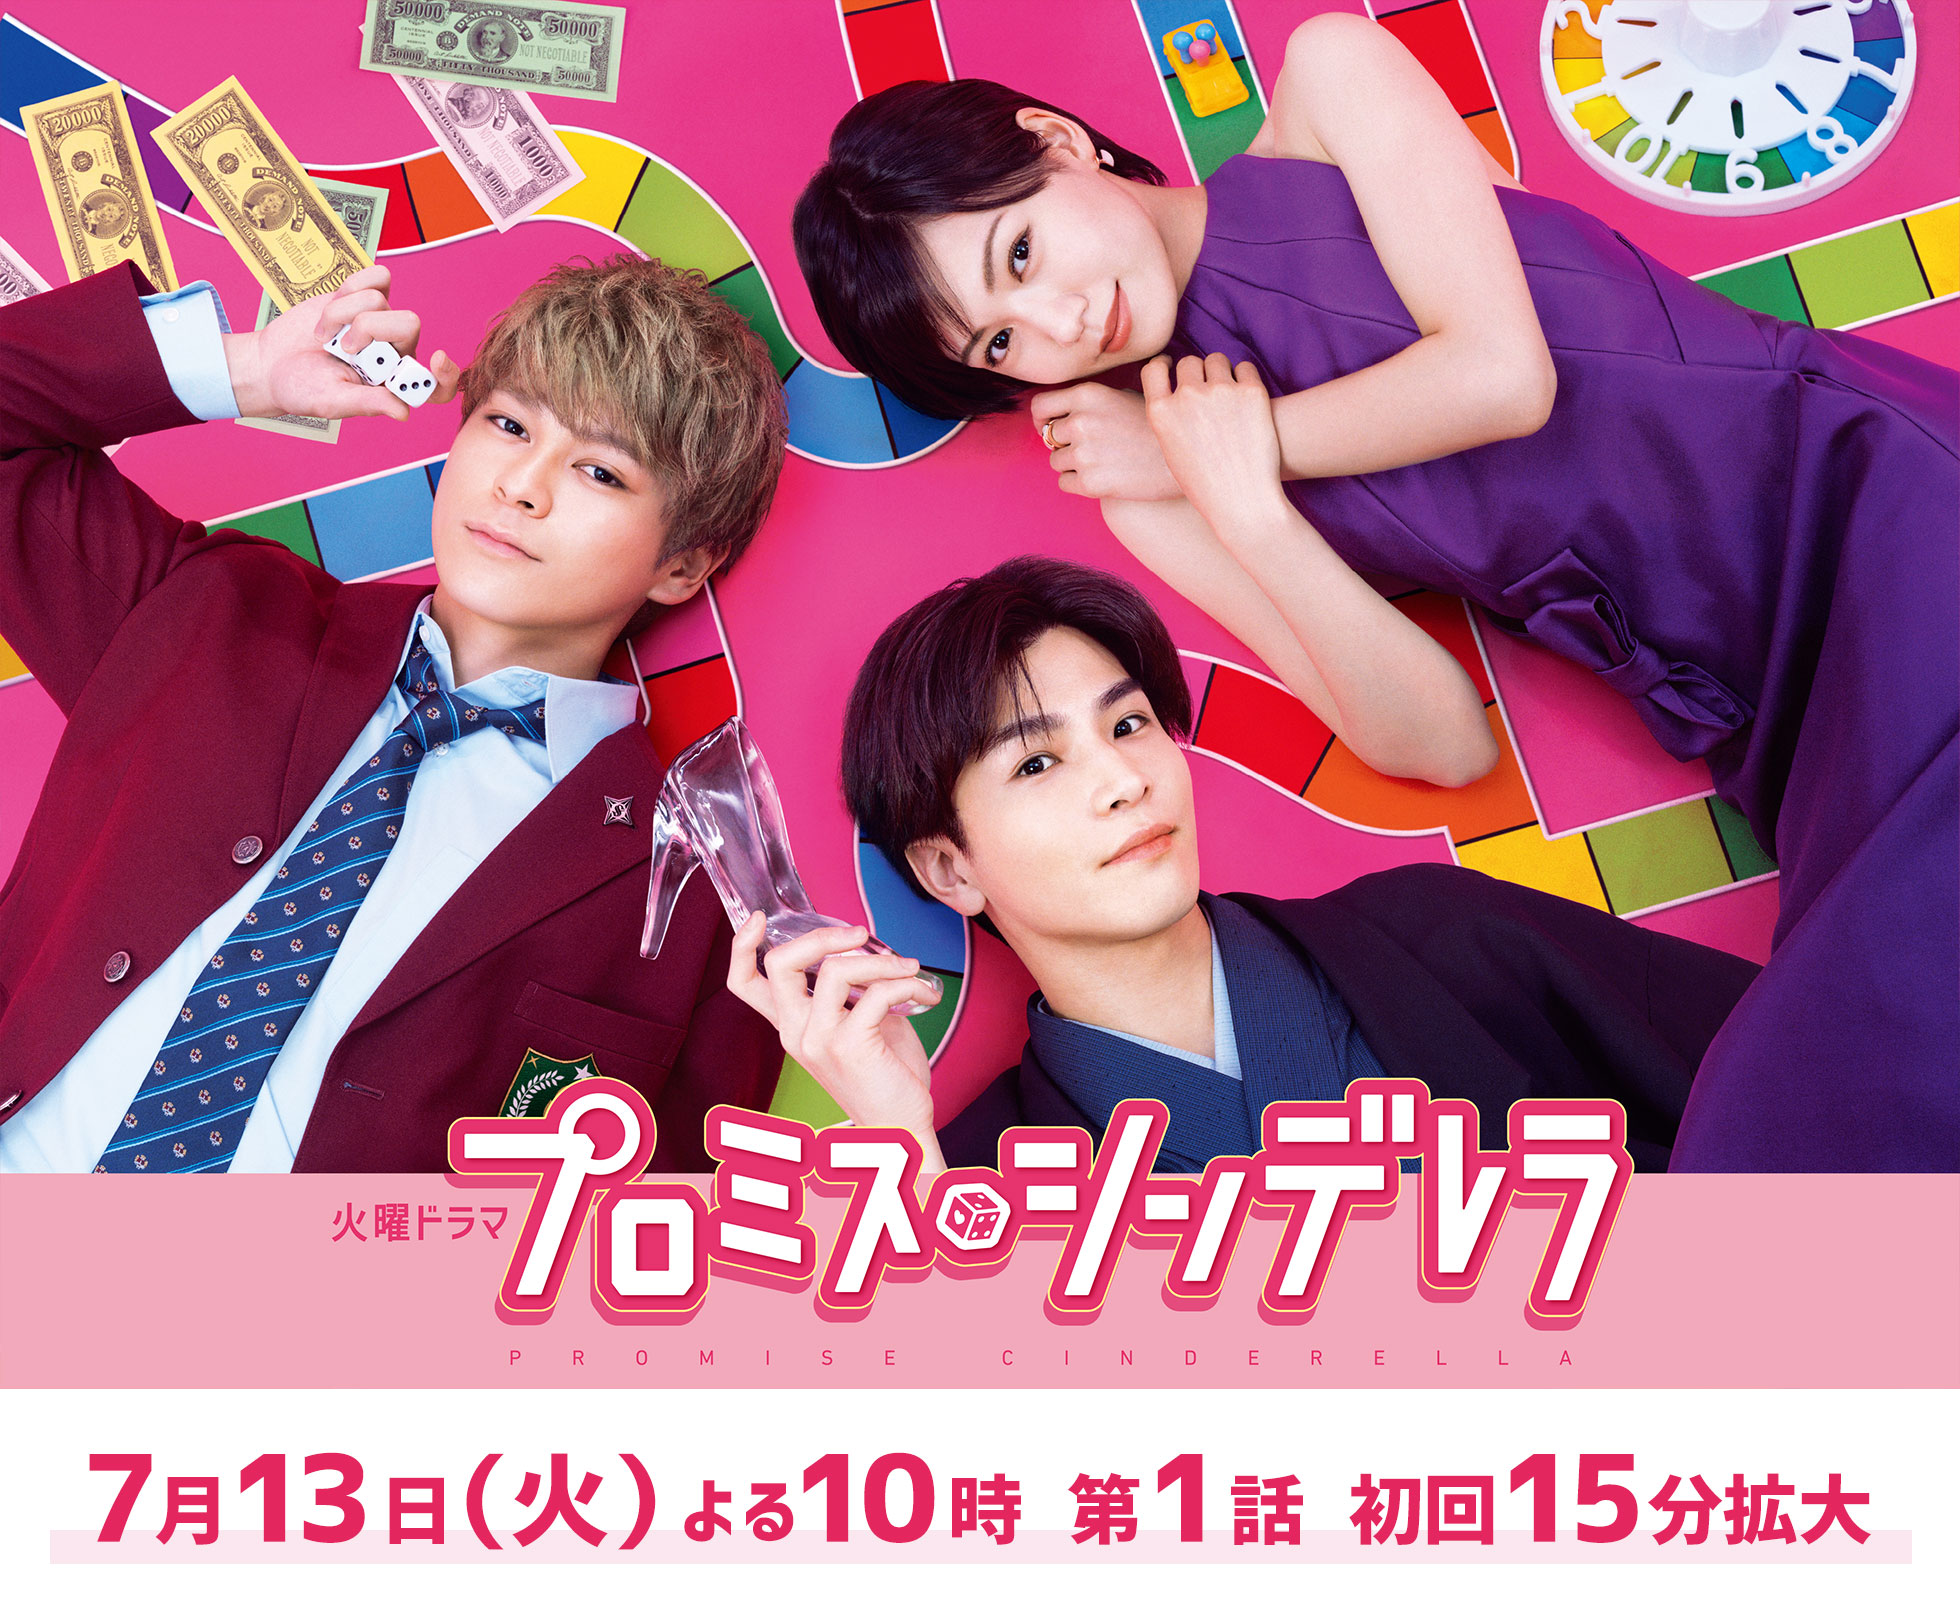 Poster of the Japanese Drama Promise Cinderella